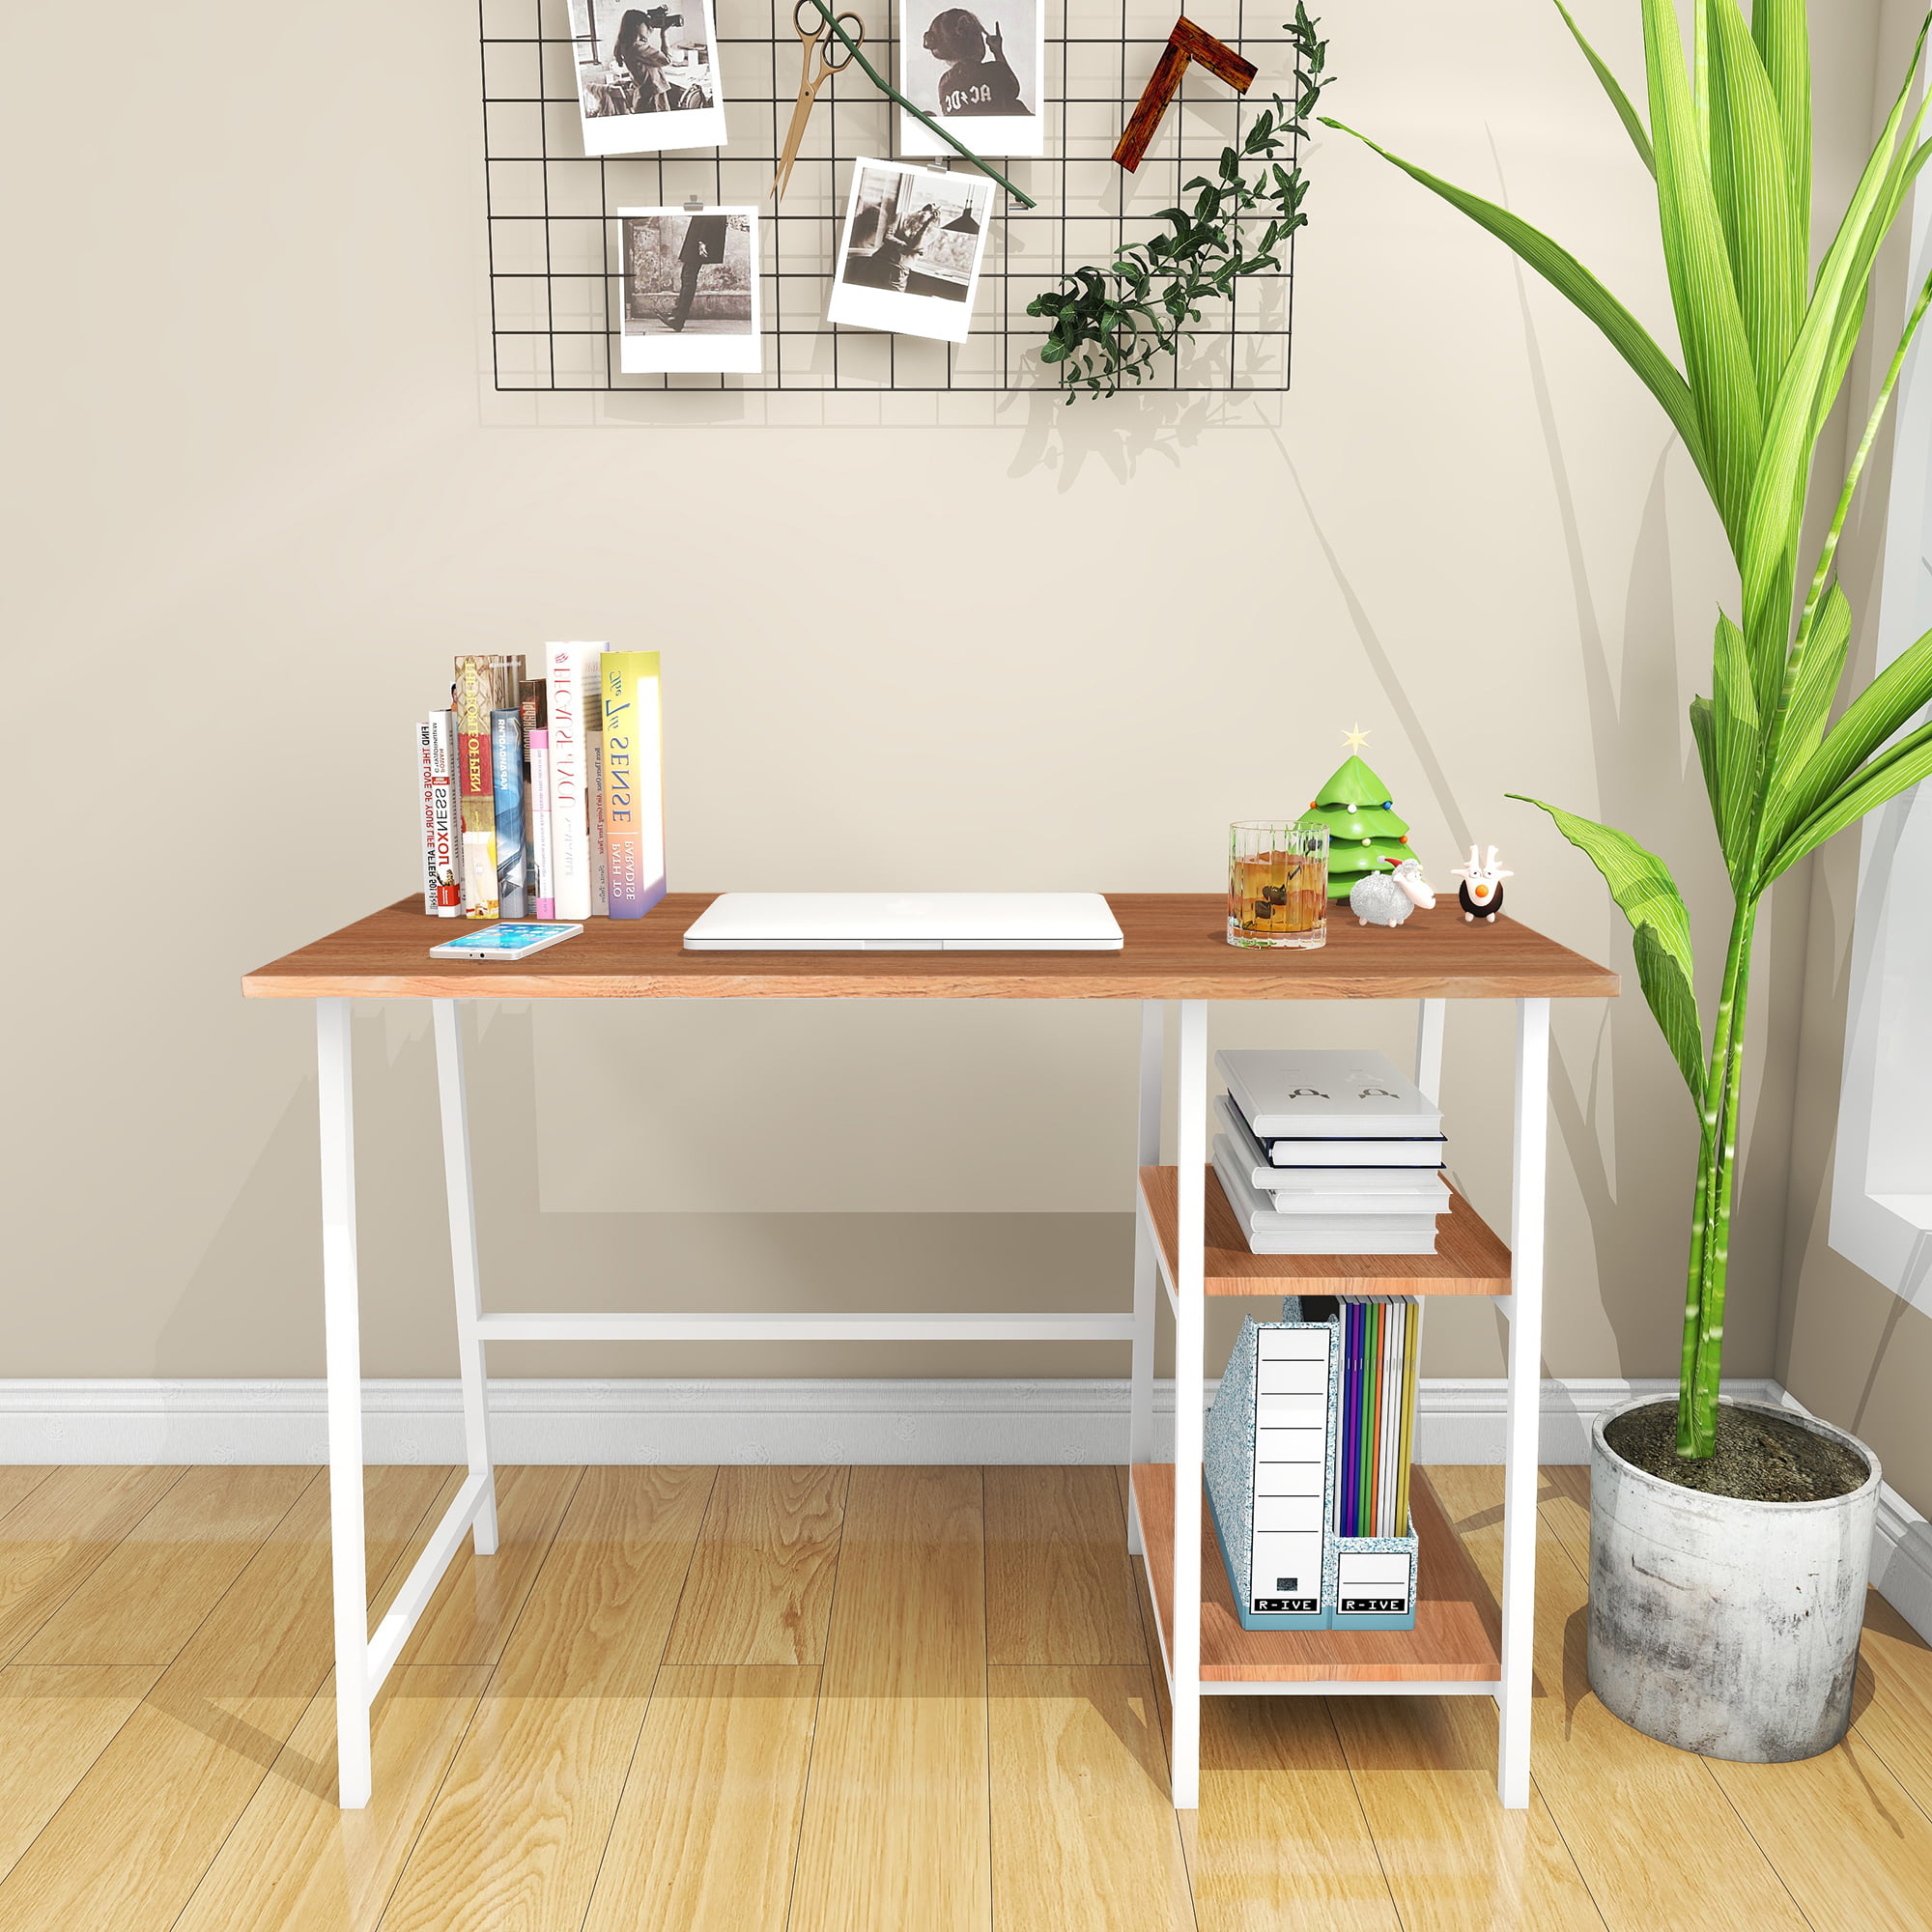 Details about   Computer Desk Table W/ Main Shelf Laptop Writing Study Table Home Desk Use 